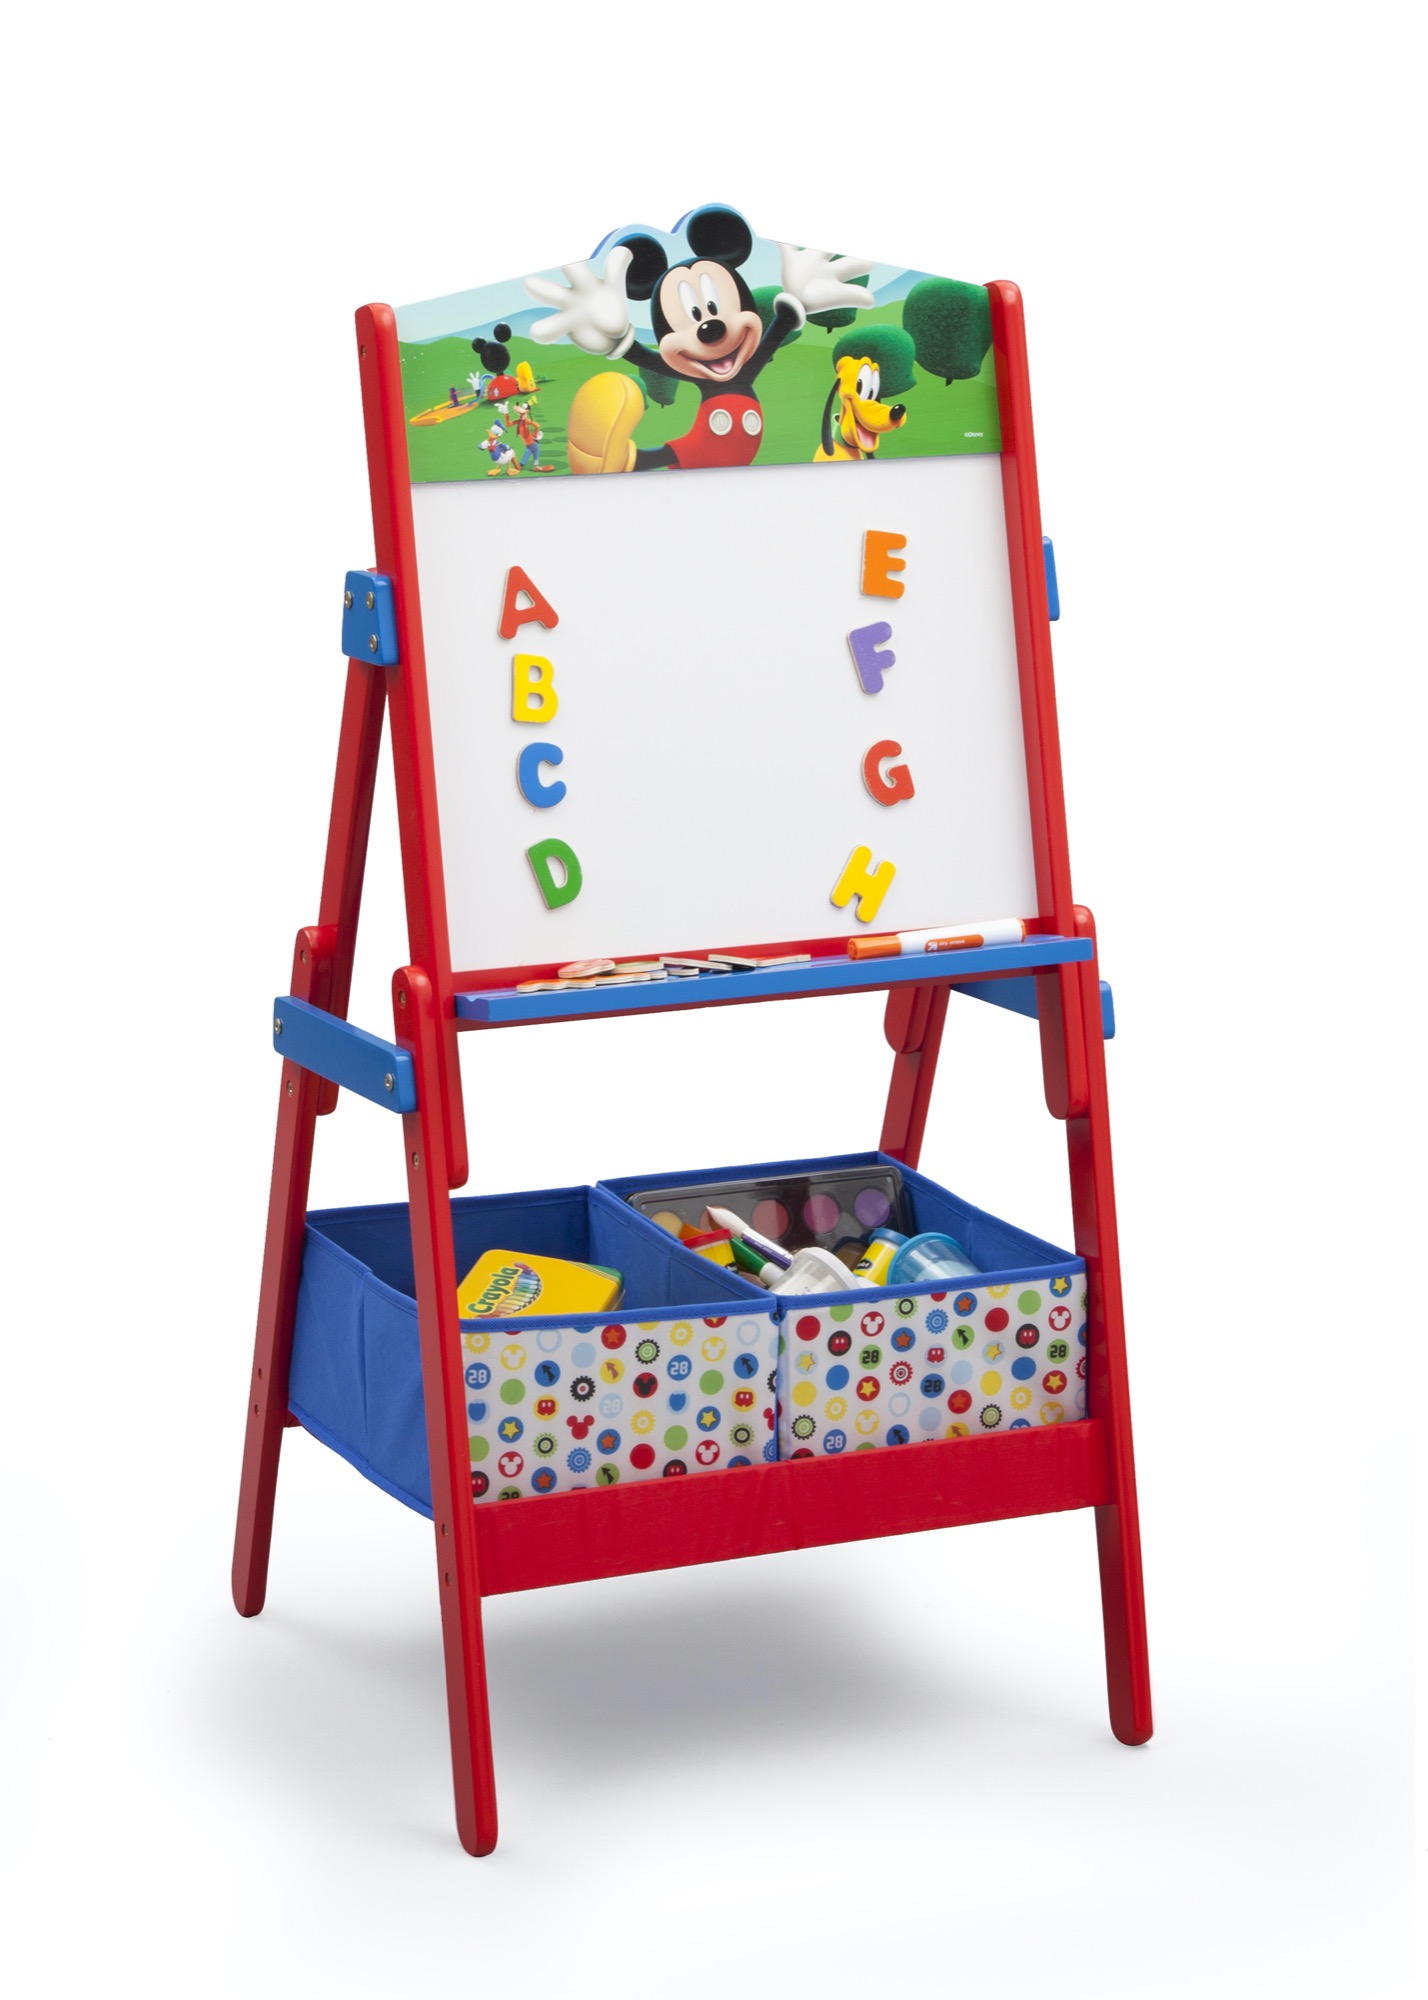 Disney Mickey Mouse Activity Easel with Storage by Delta Children, Greenguard Gold Certified - image 1 of 7